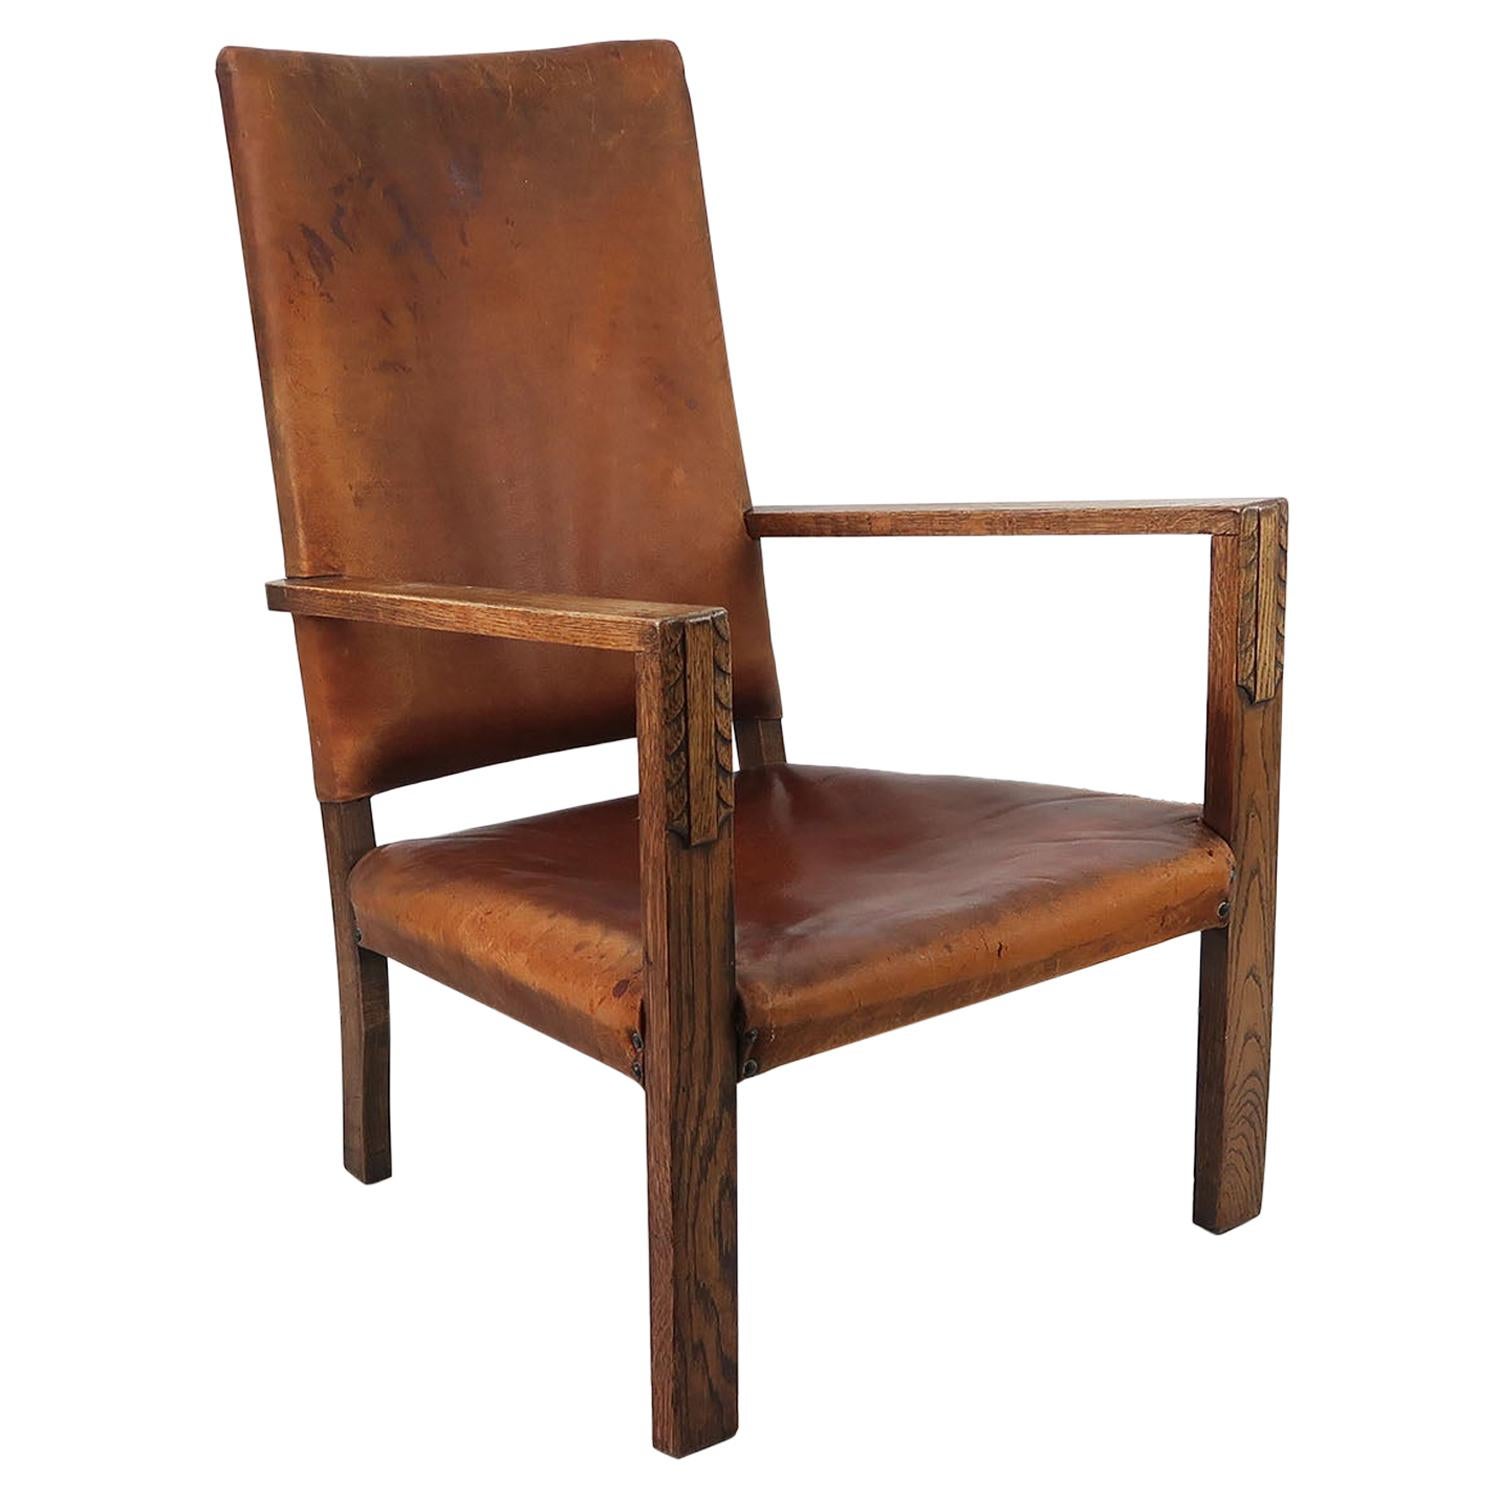 Antique Cotswold School Style Leather Lounge Chair. English. C.1920